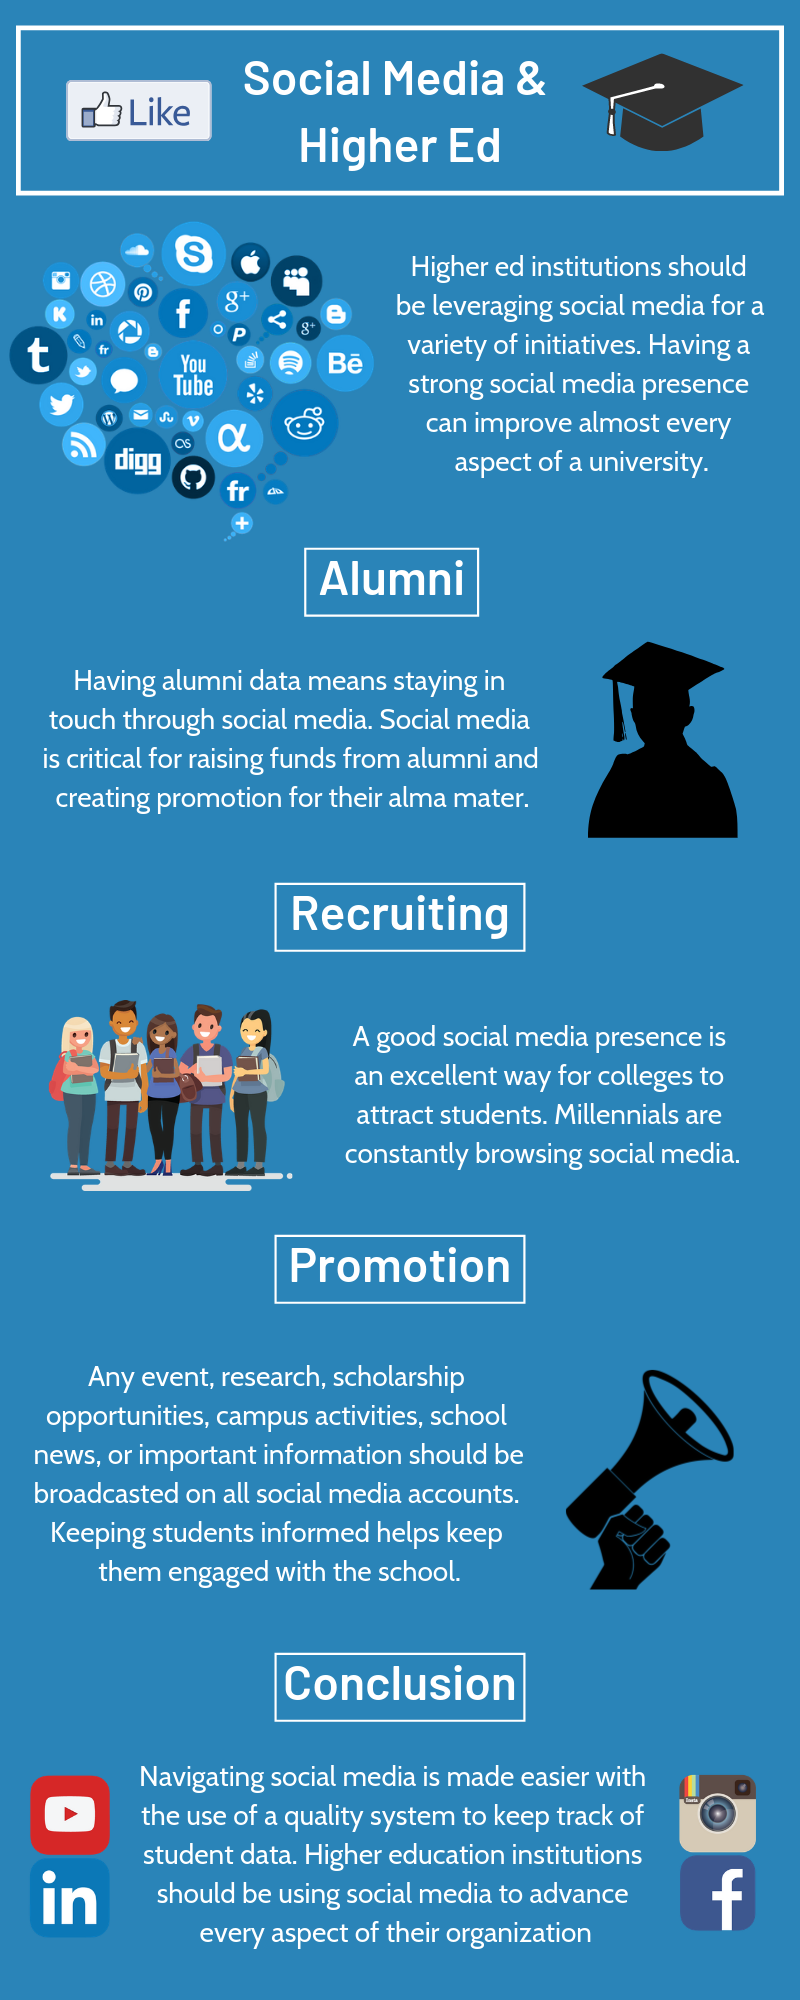 Visit Runner EDQ's website to learn more about how our student and alumni data quality solutions help higher education institutions do better on social media. Keeping student and alumni data clean and updated plays an essential role in making sure that your social media promotional efforts aren’t in vain.